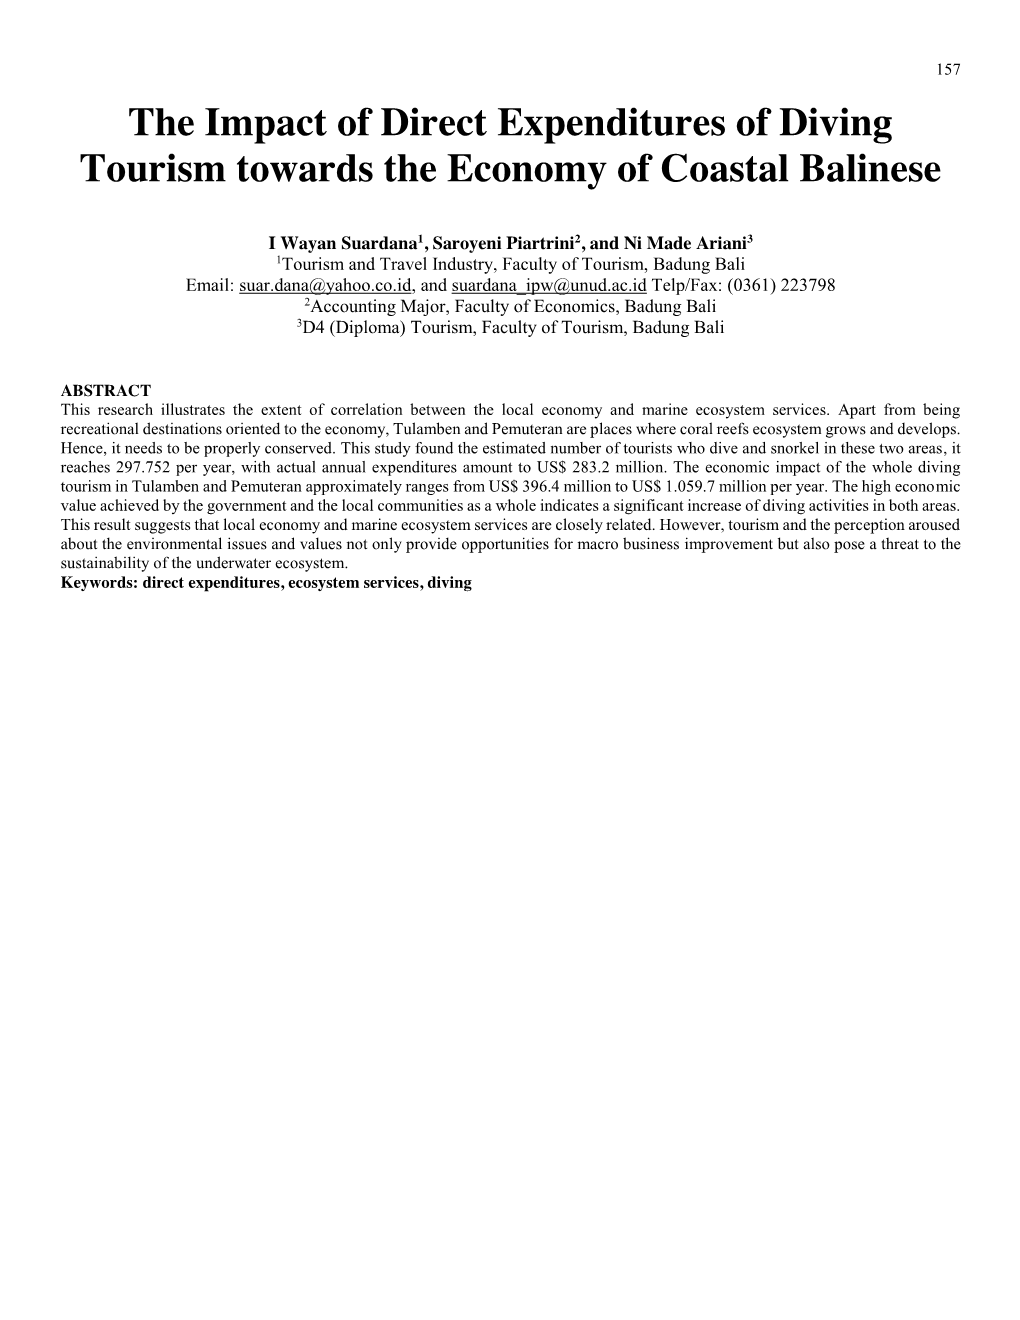 The Impact of Direct Expenditures of Diving Tourism Towards the Economy of Coastal Balinese